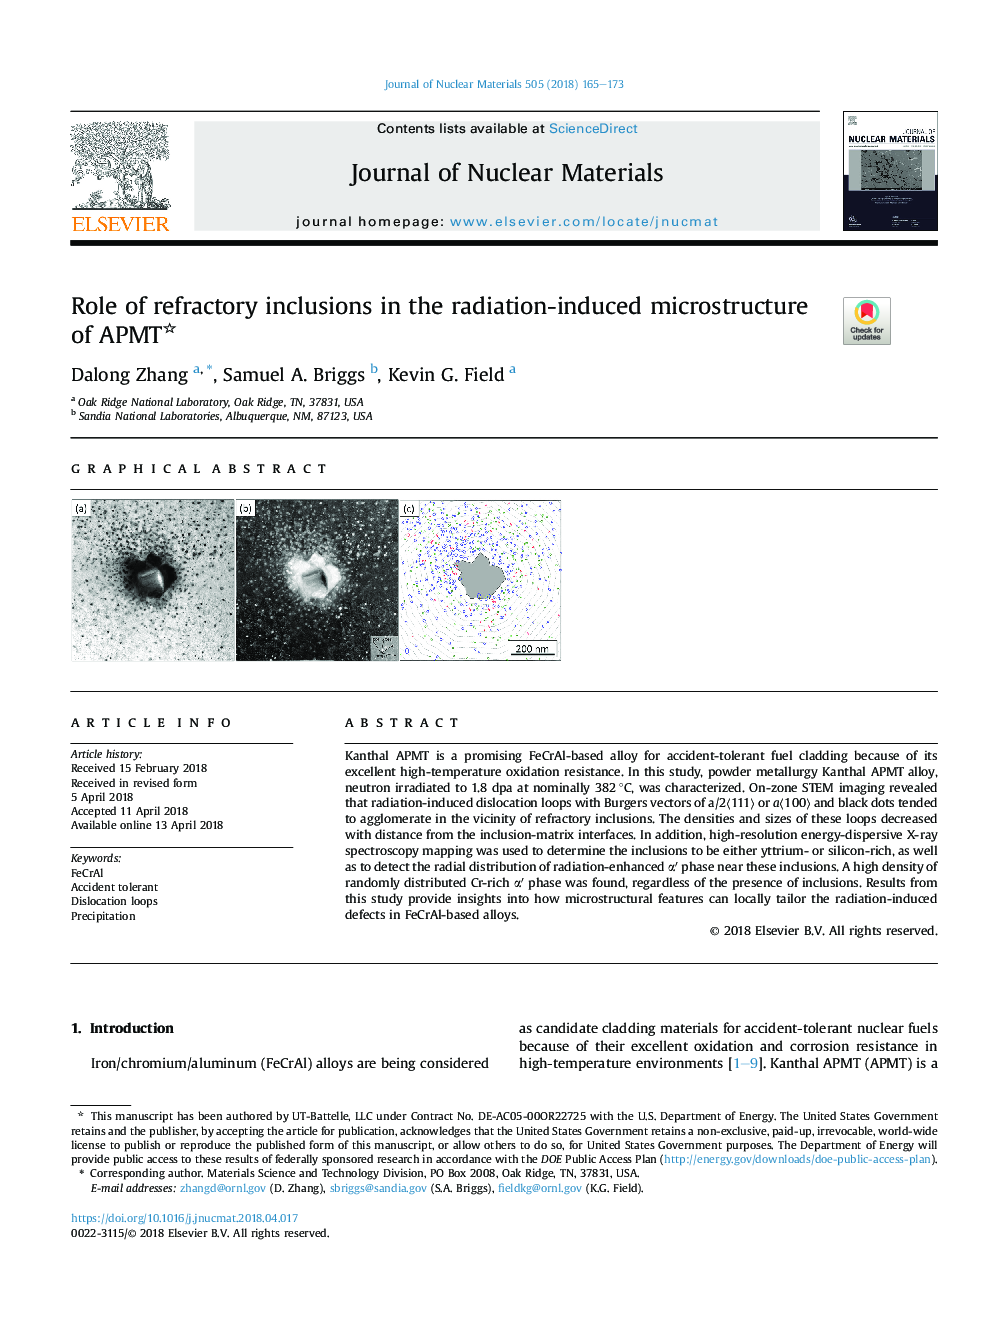 Role of refractory inclusions in the radiation-induced microstructure of APMT